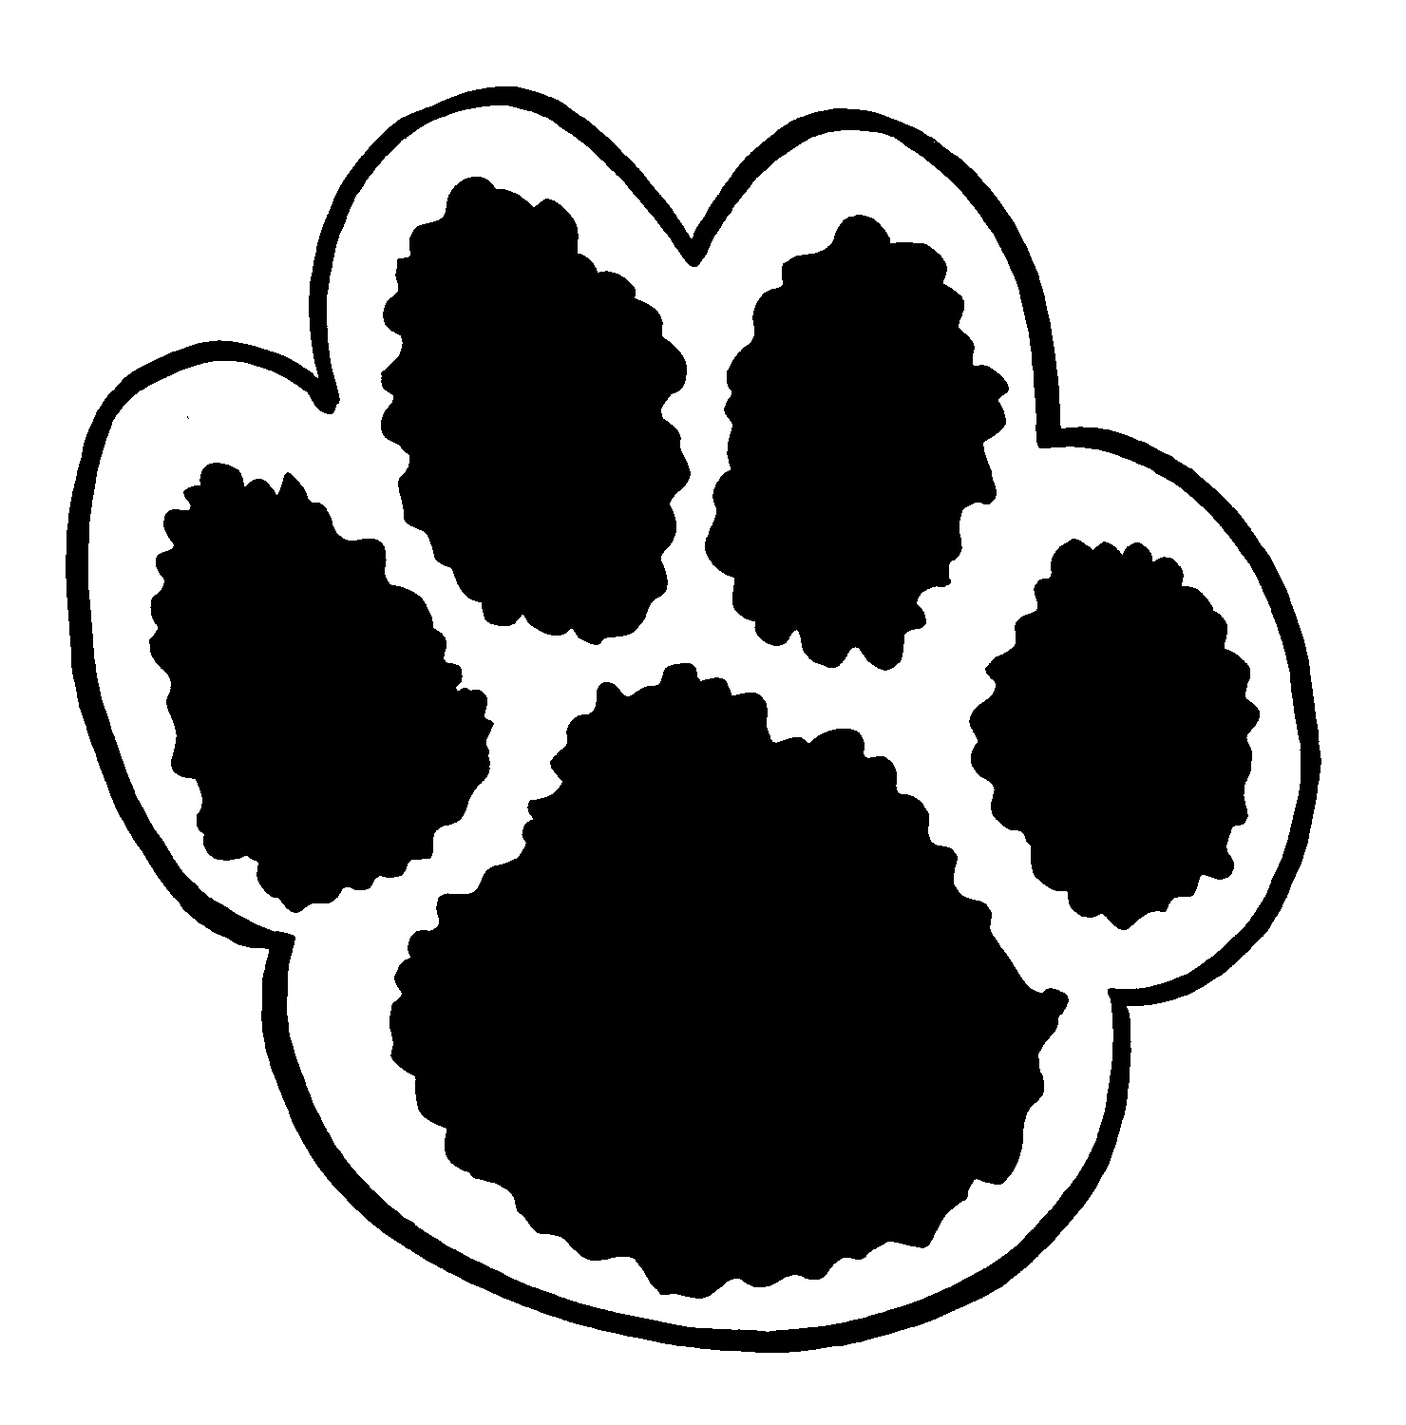 Paw Print Clip Art In Black And White Transparent Png.